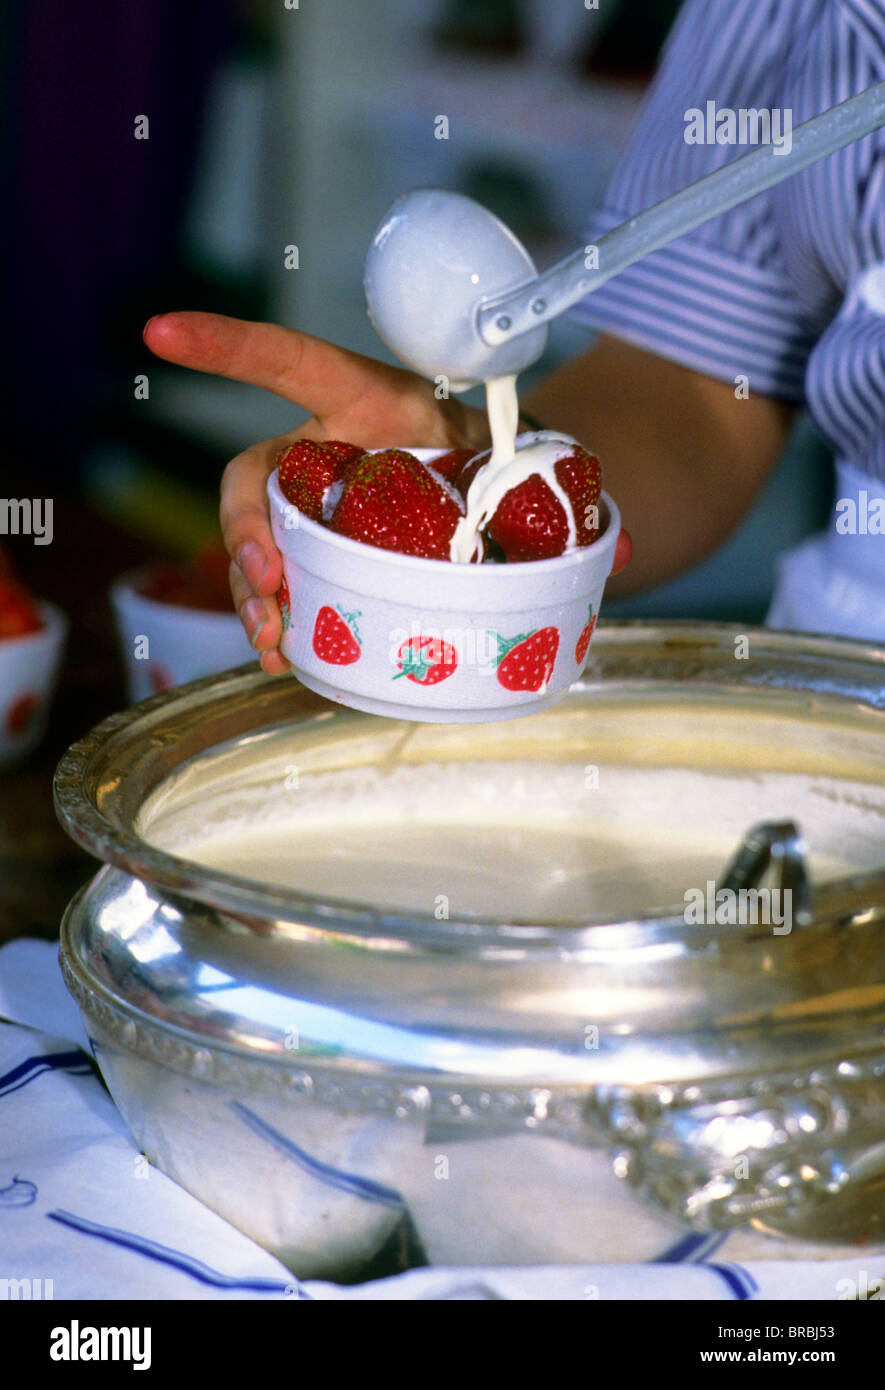 Server pouring cream over strawberries at a tennis match Stock Photo